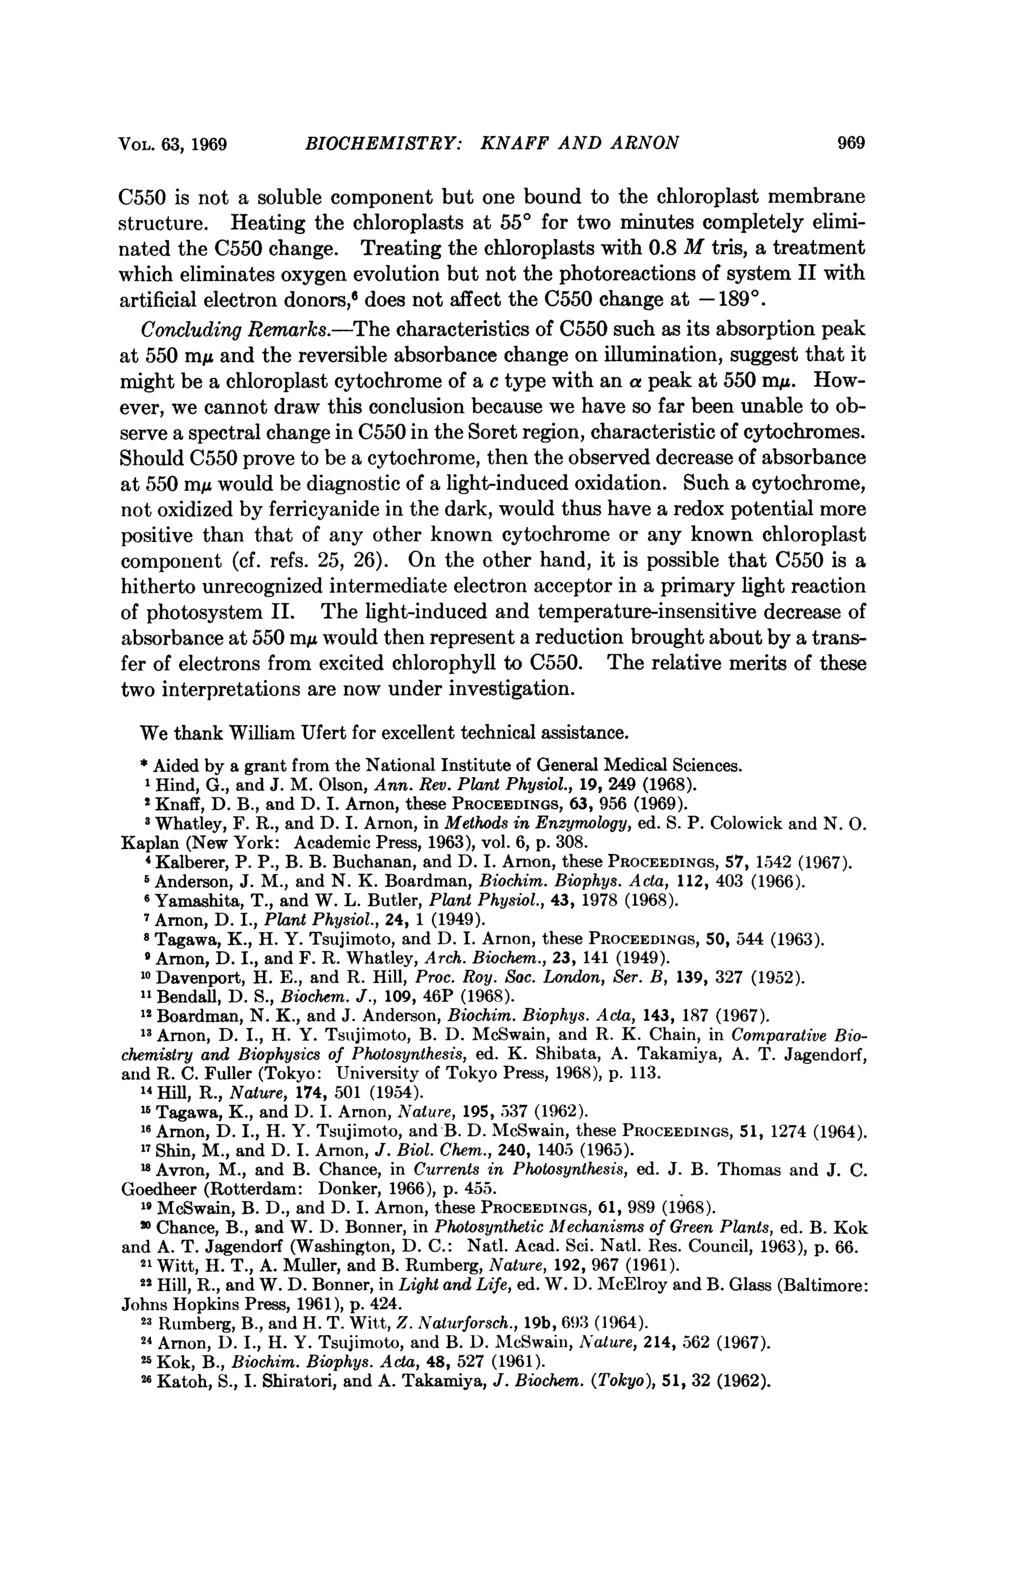 VOL. 63, 1969 BIOCHEMISTRY: KNAFF AND ARNON 969 C550 is not a soluble component but one bound to the chloroplast membrane structure.